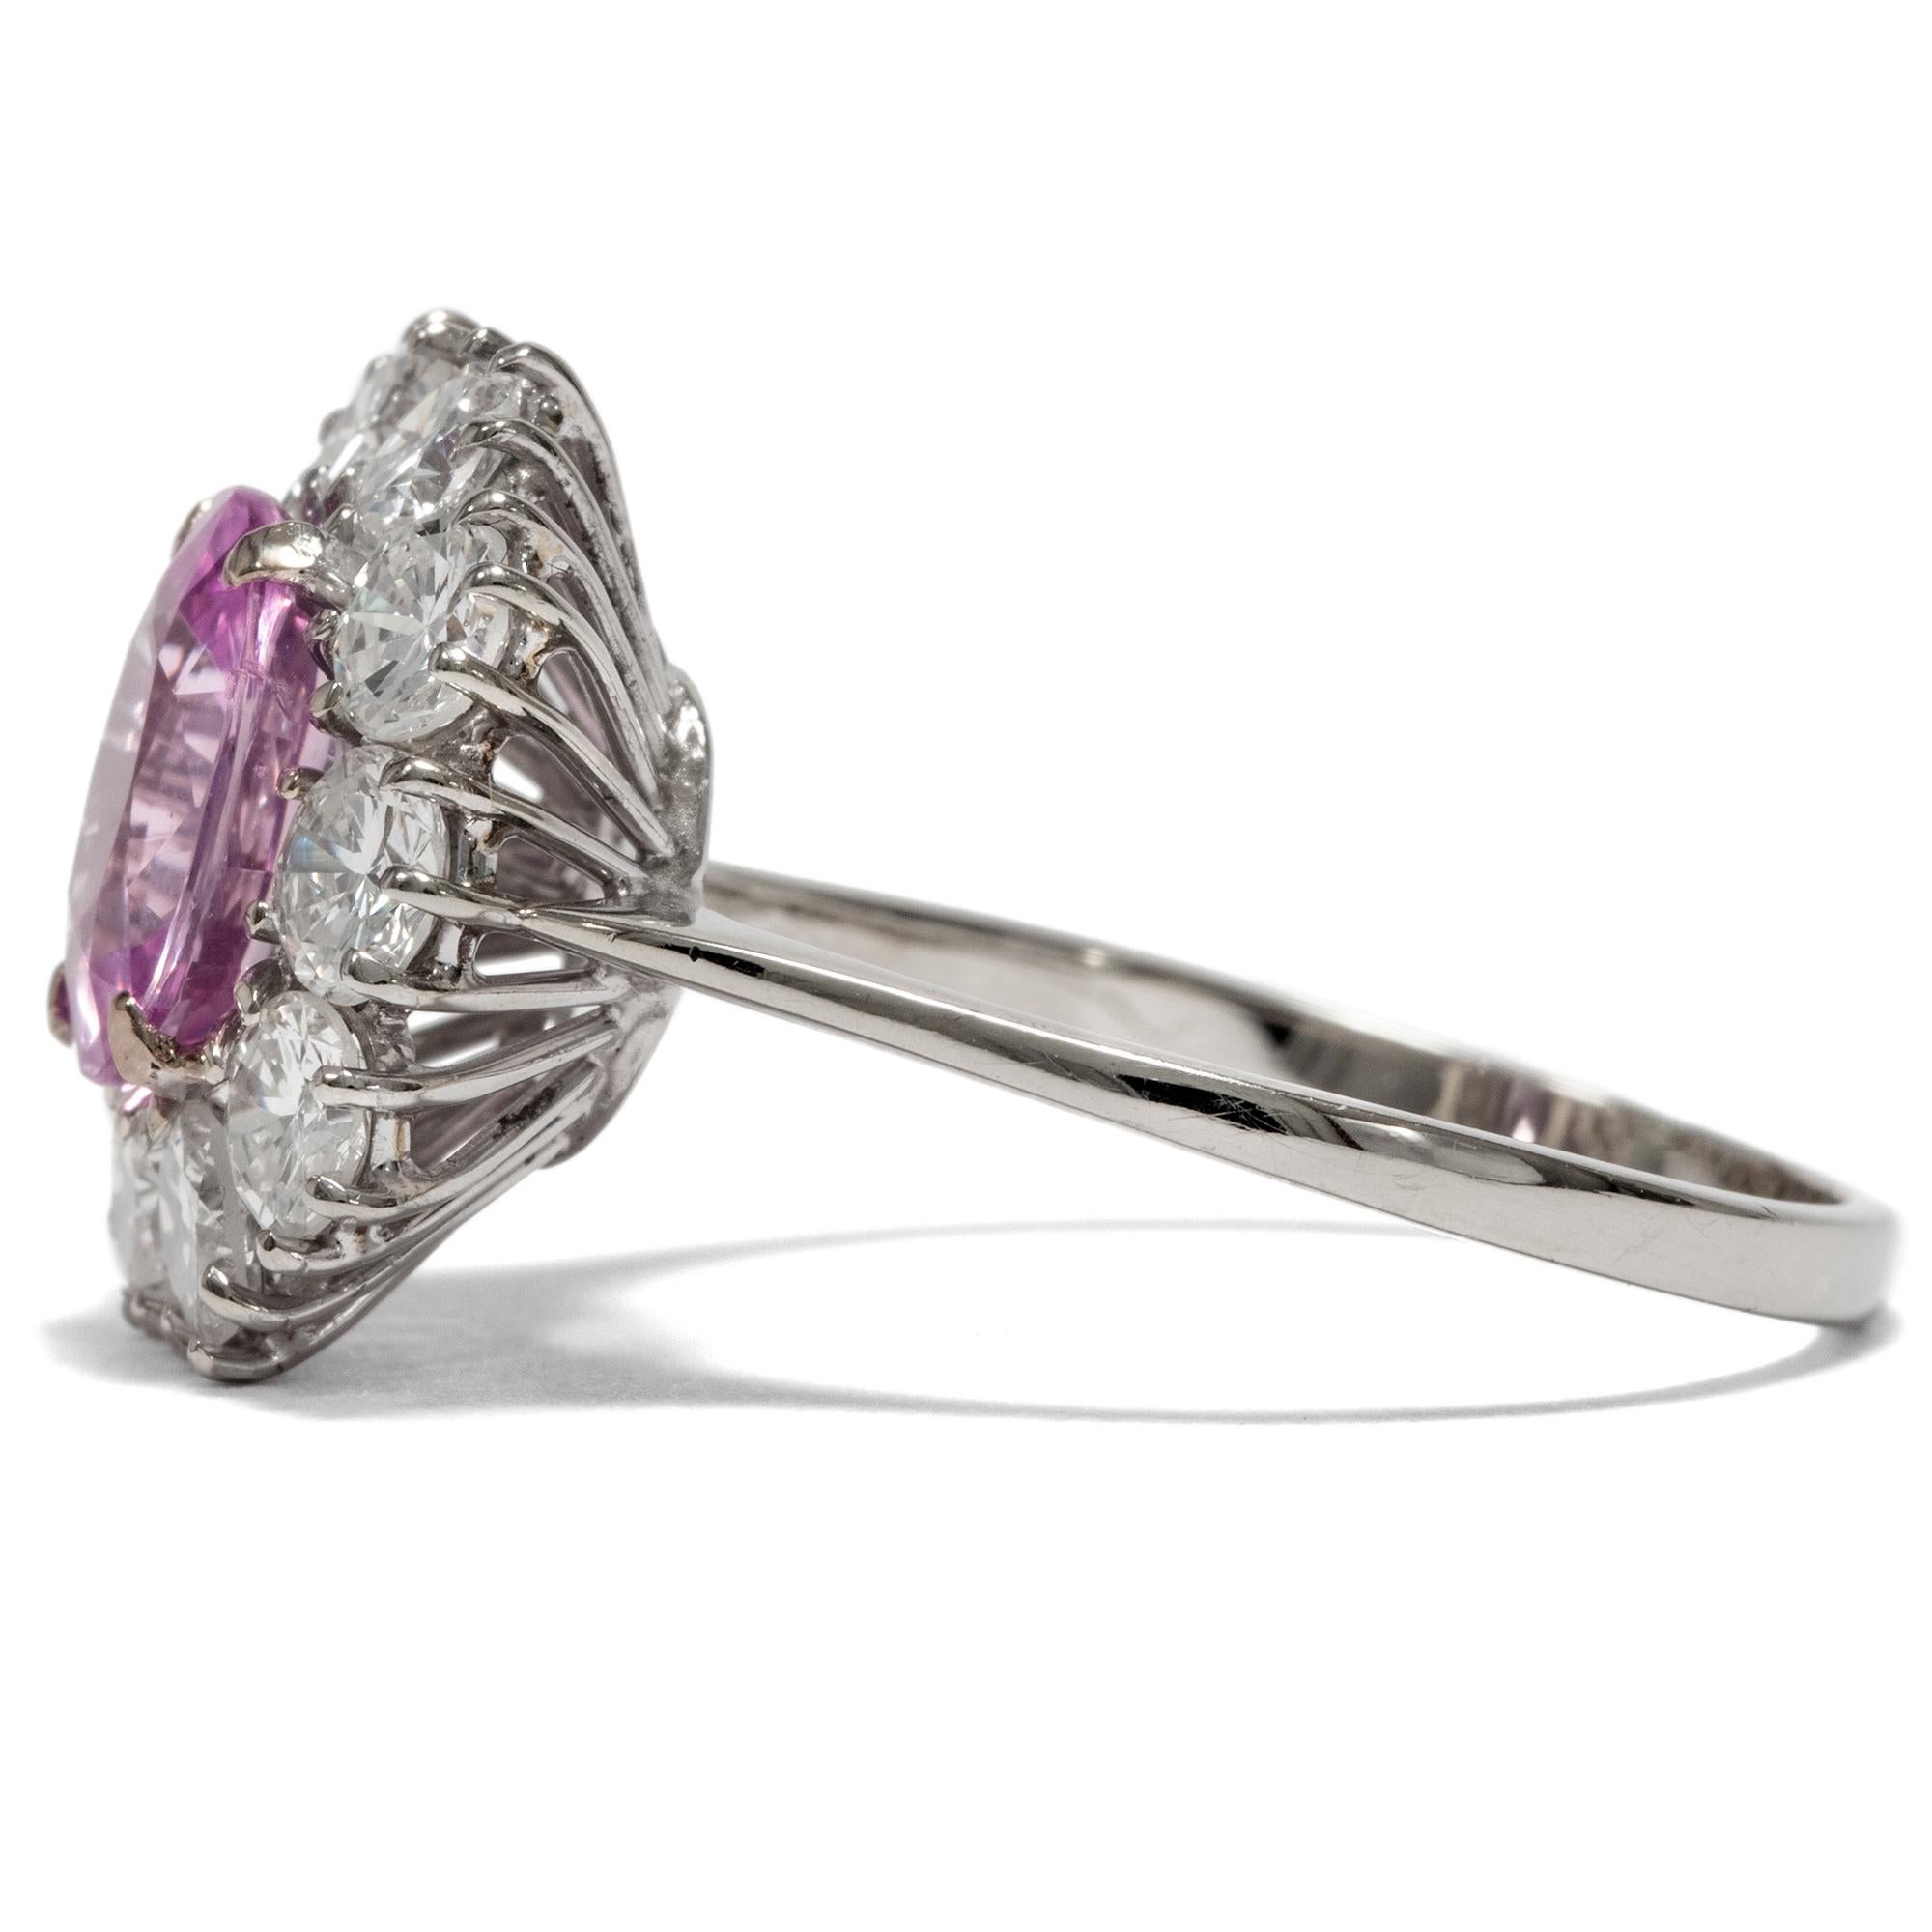 Oval Cut Vintage circa 1970 Certified No Heat 2.81 Carat Pink Sapphire Cluster Ring For Sale